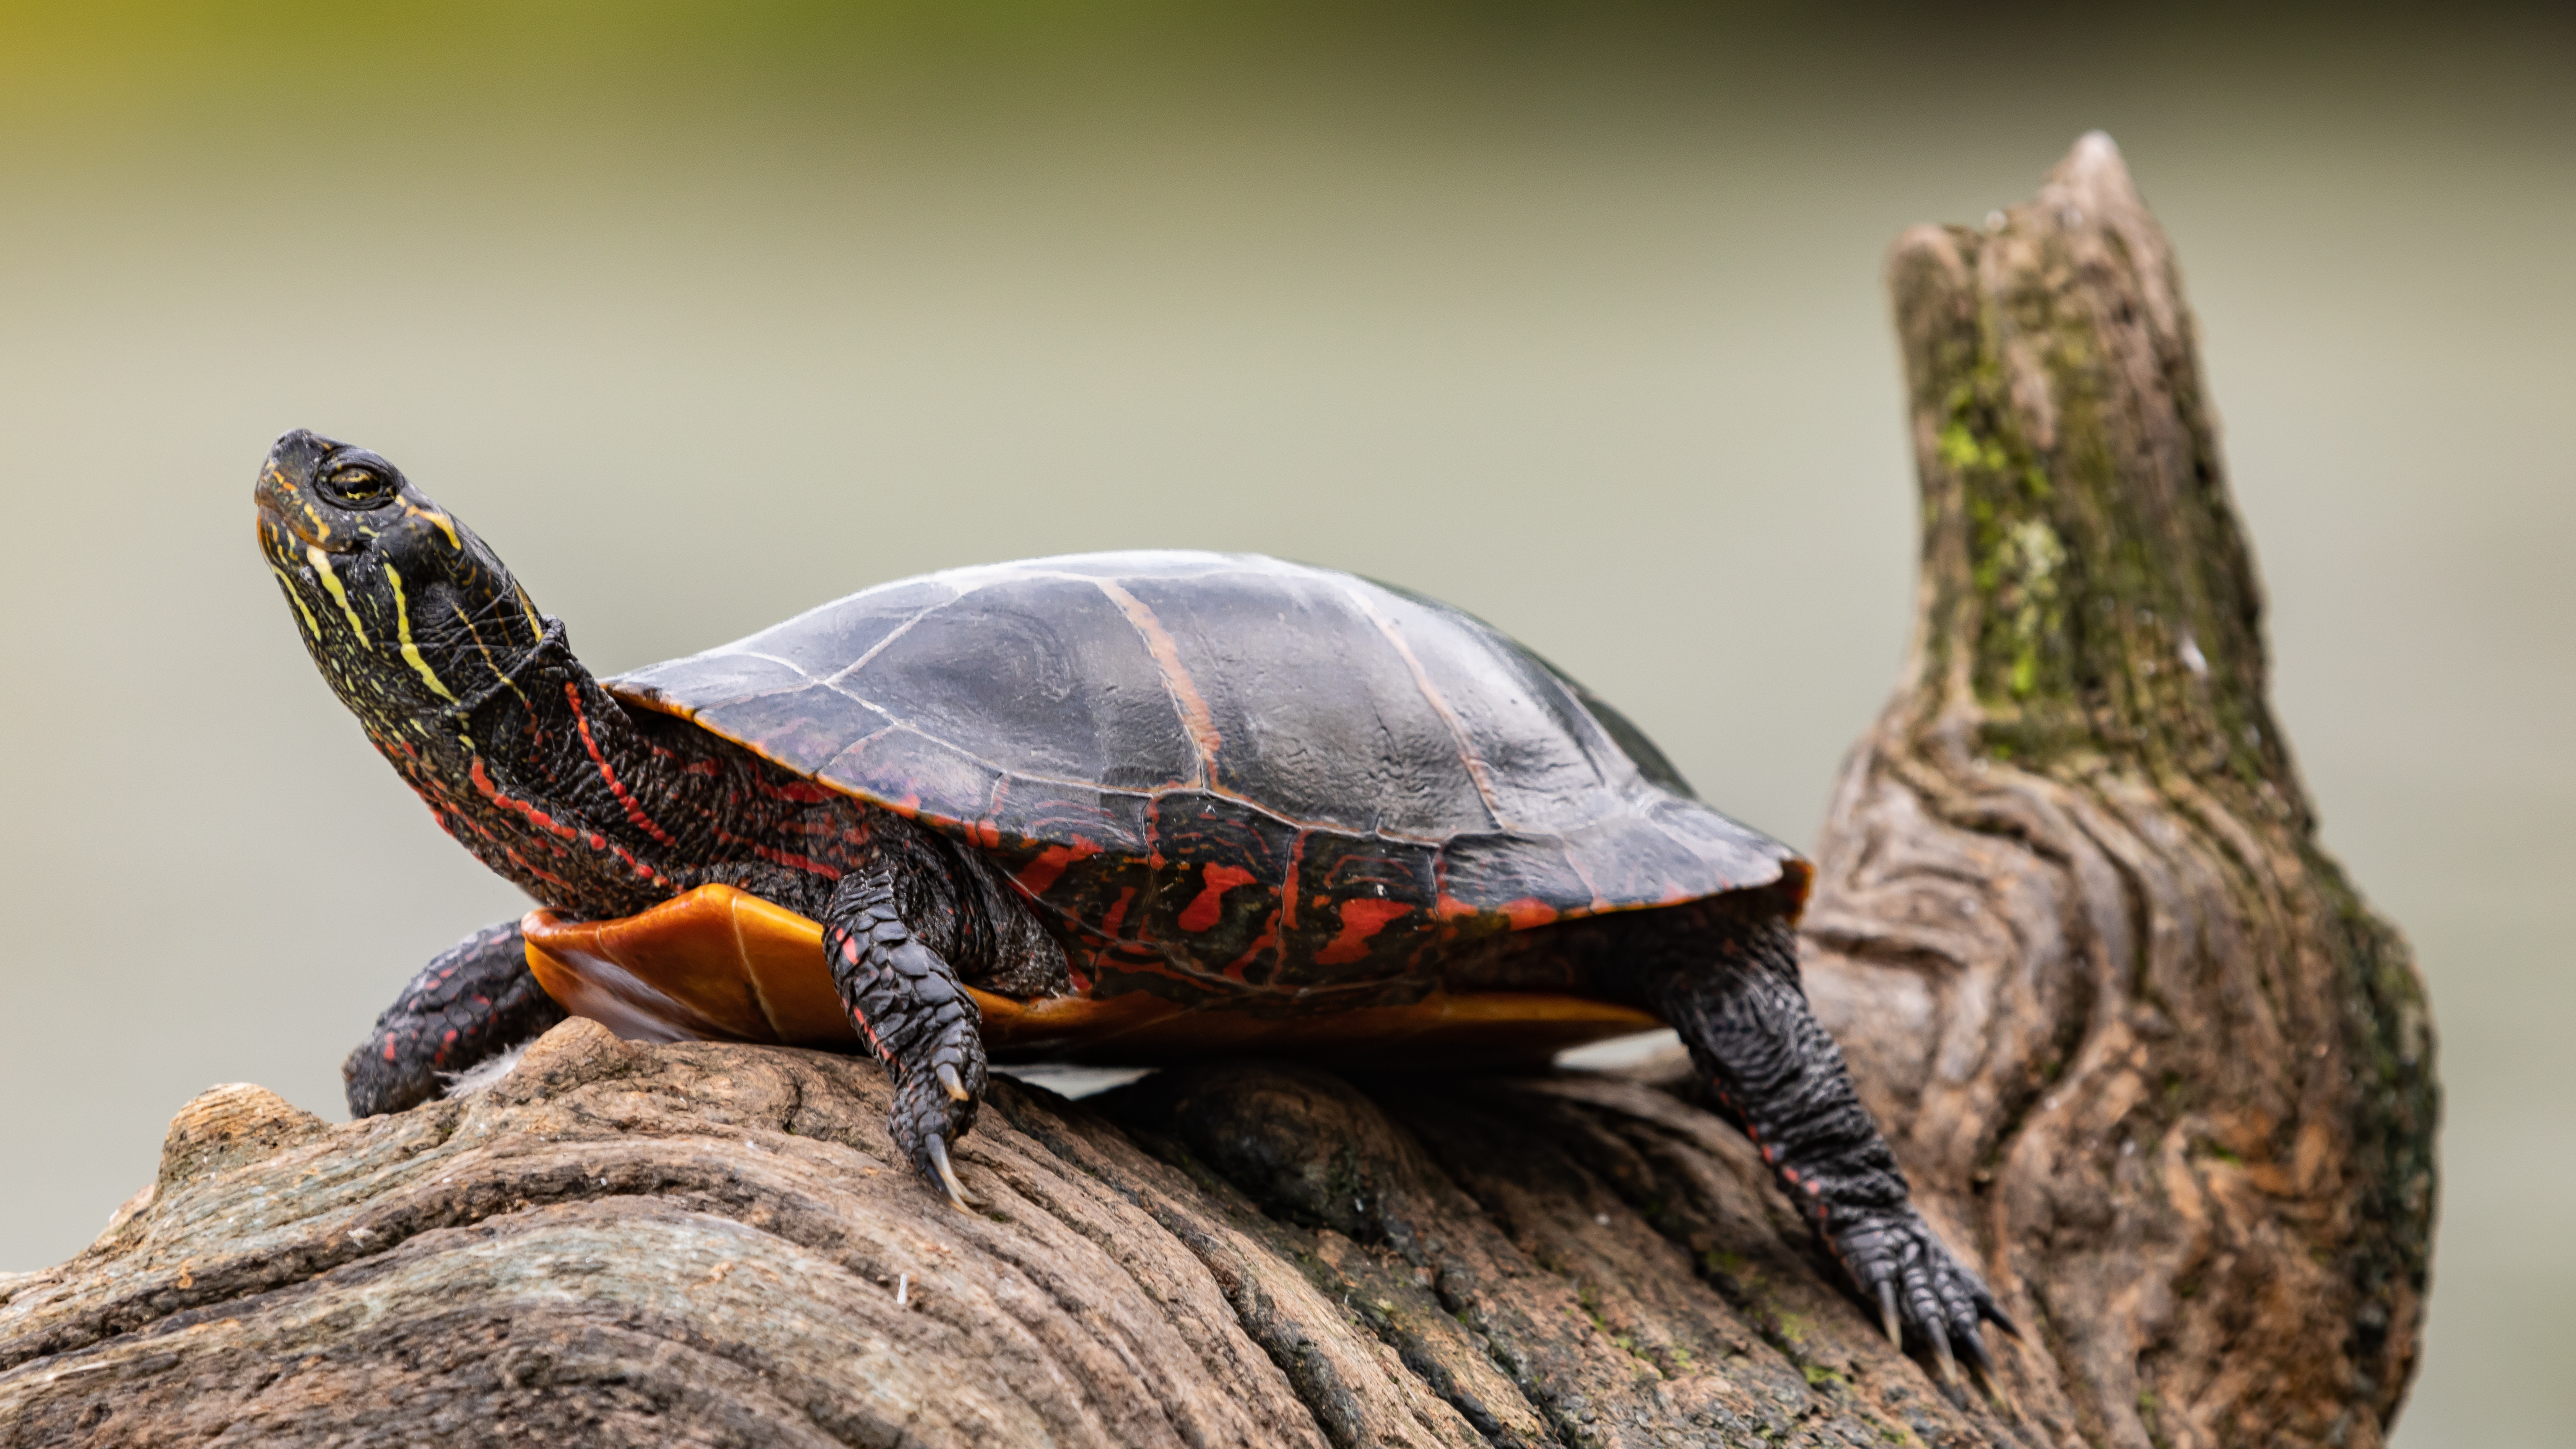 A painted turtle with dark skin and shell with bright yellow stripes resting on a log crests its neck upward